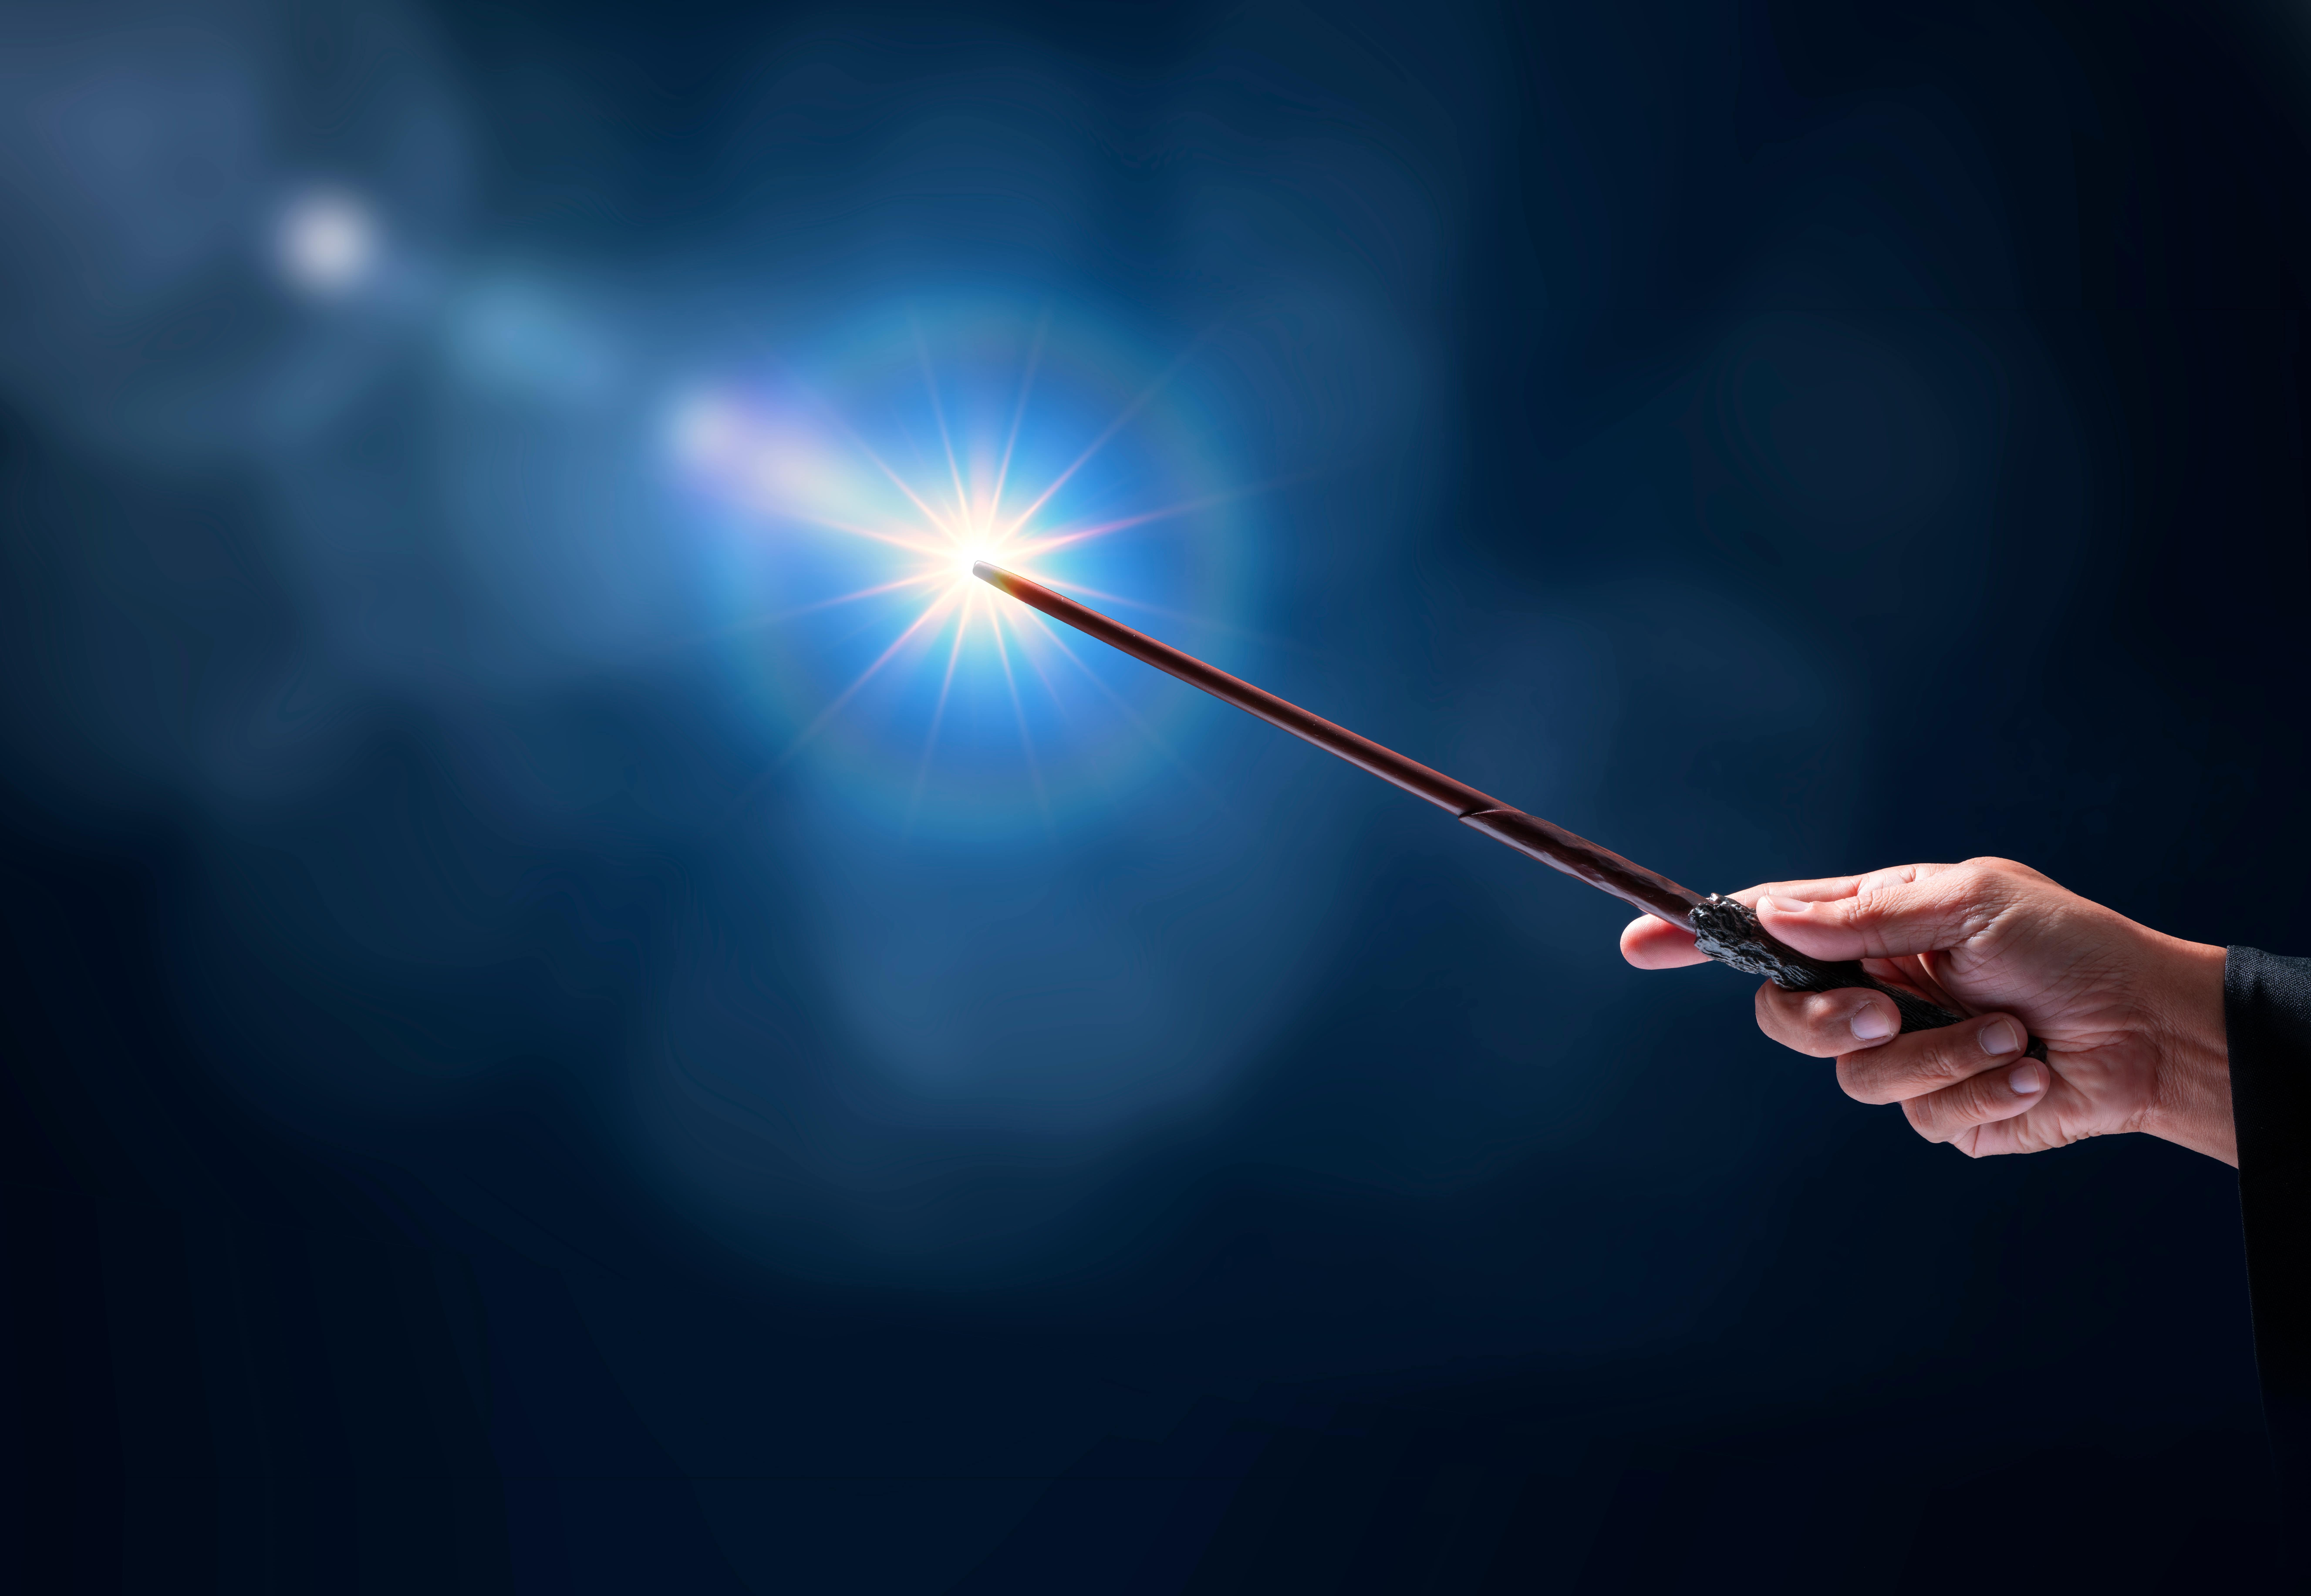 Wave a Magic Wand: What Can You Accomplish with Perfect Data?